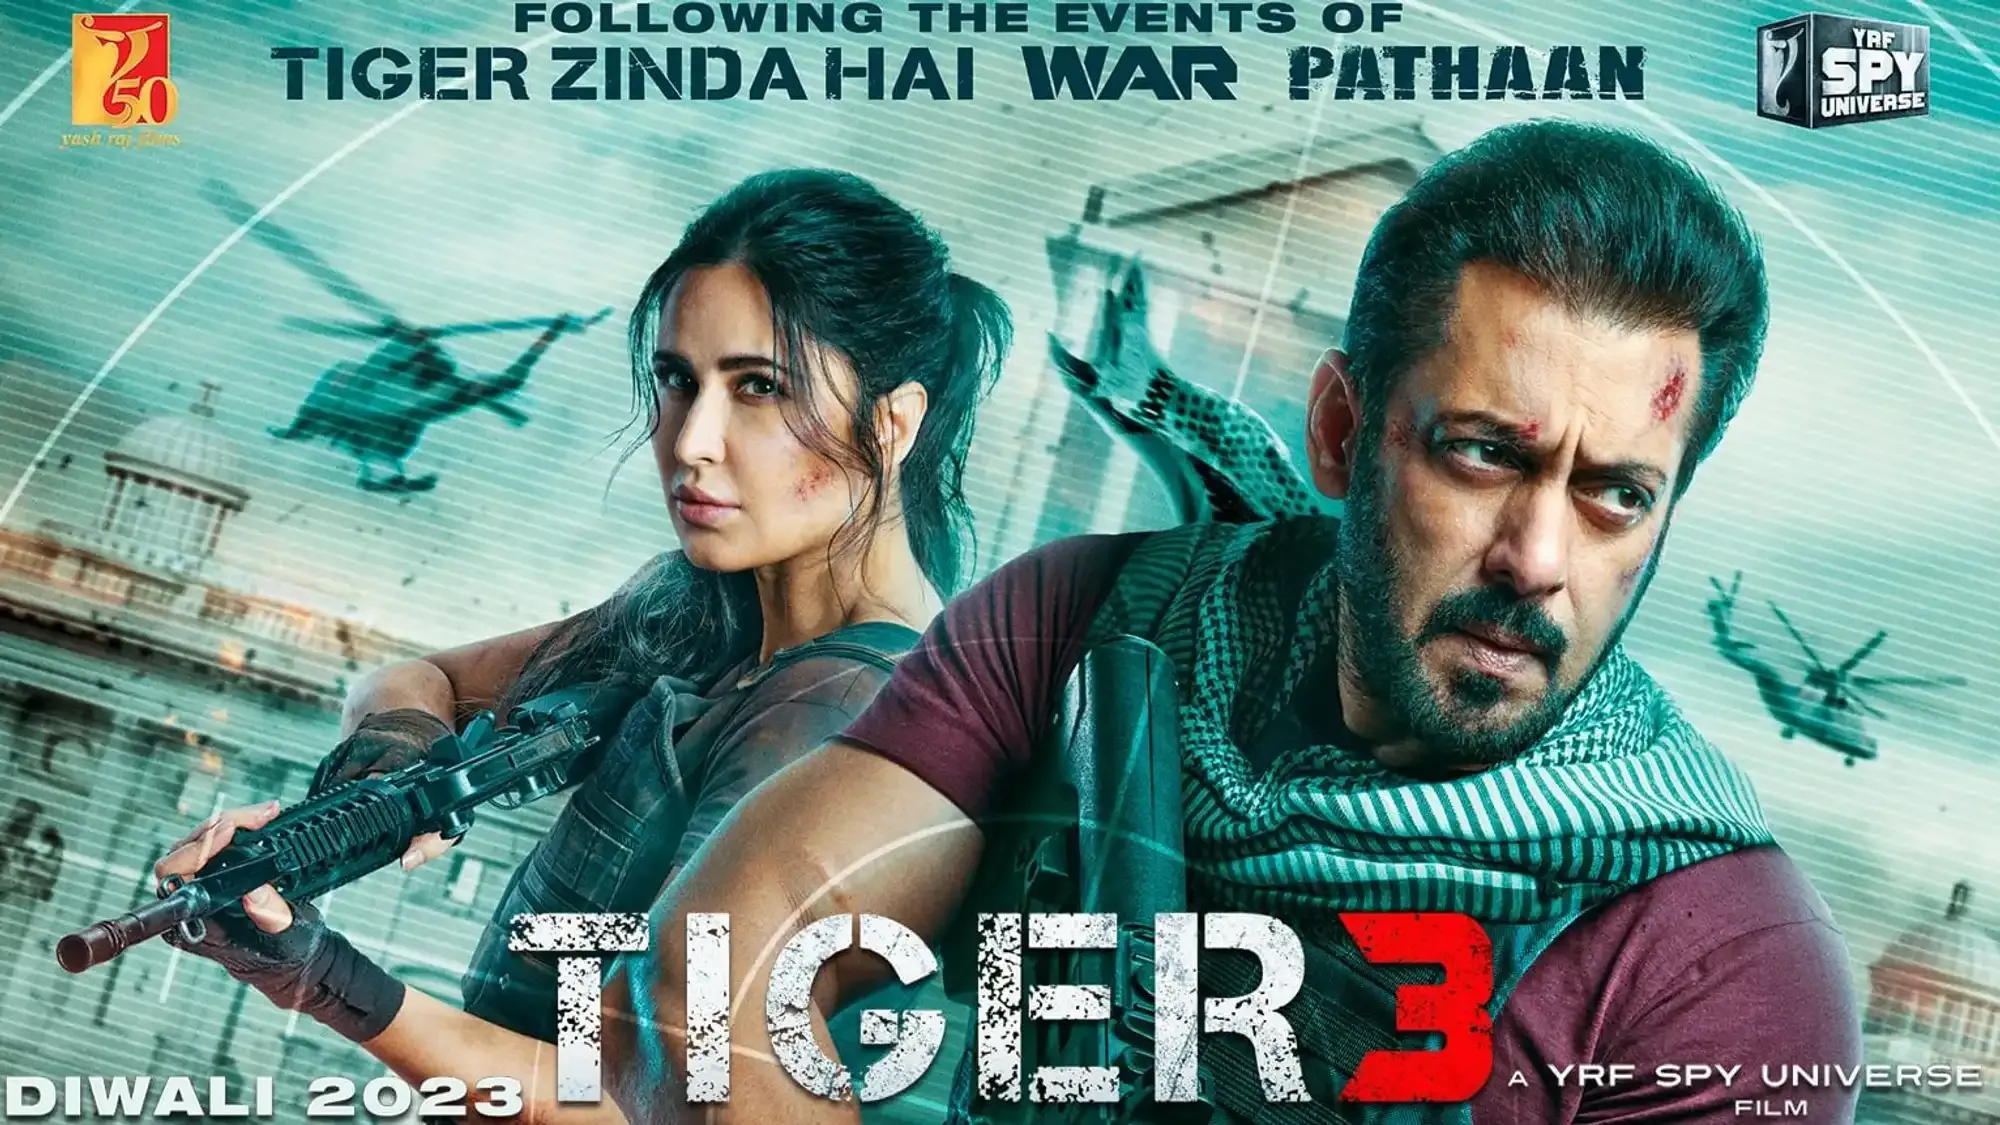 Tiger 3 movie review